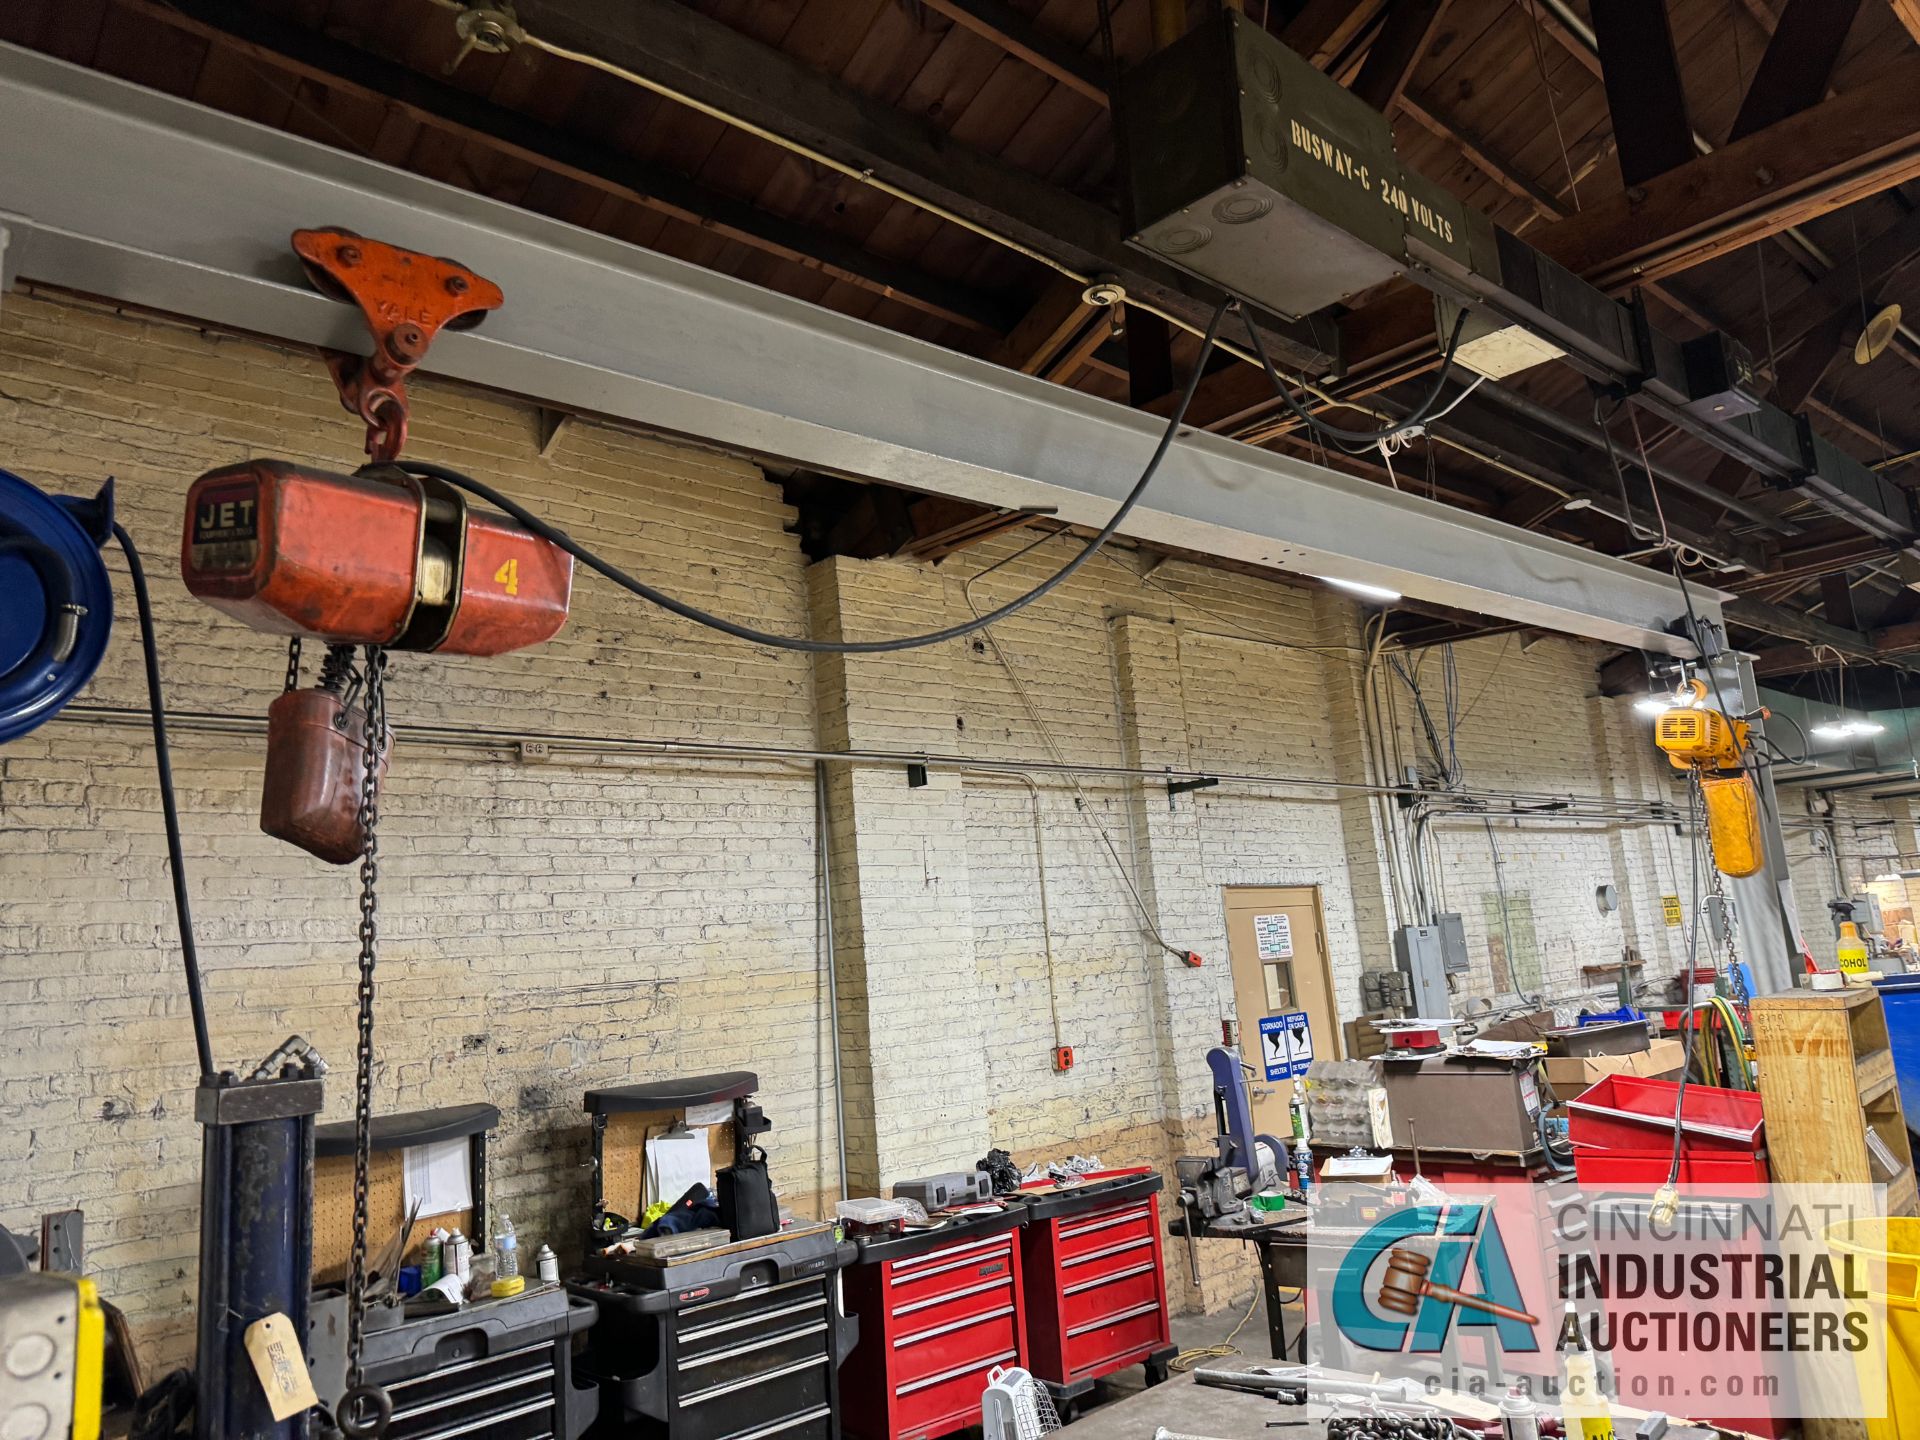 Free Standing 1 Crane w/ (2) 1 Ton Electric Hoists 6"x 6" Beams, 224" Span, 112" Beam Height - Image 3 of 5